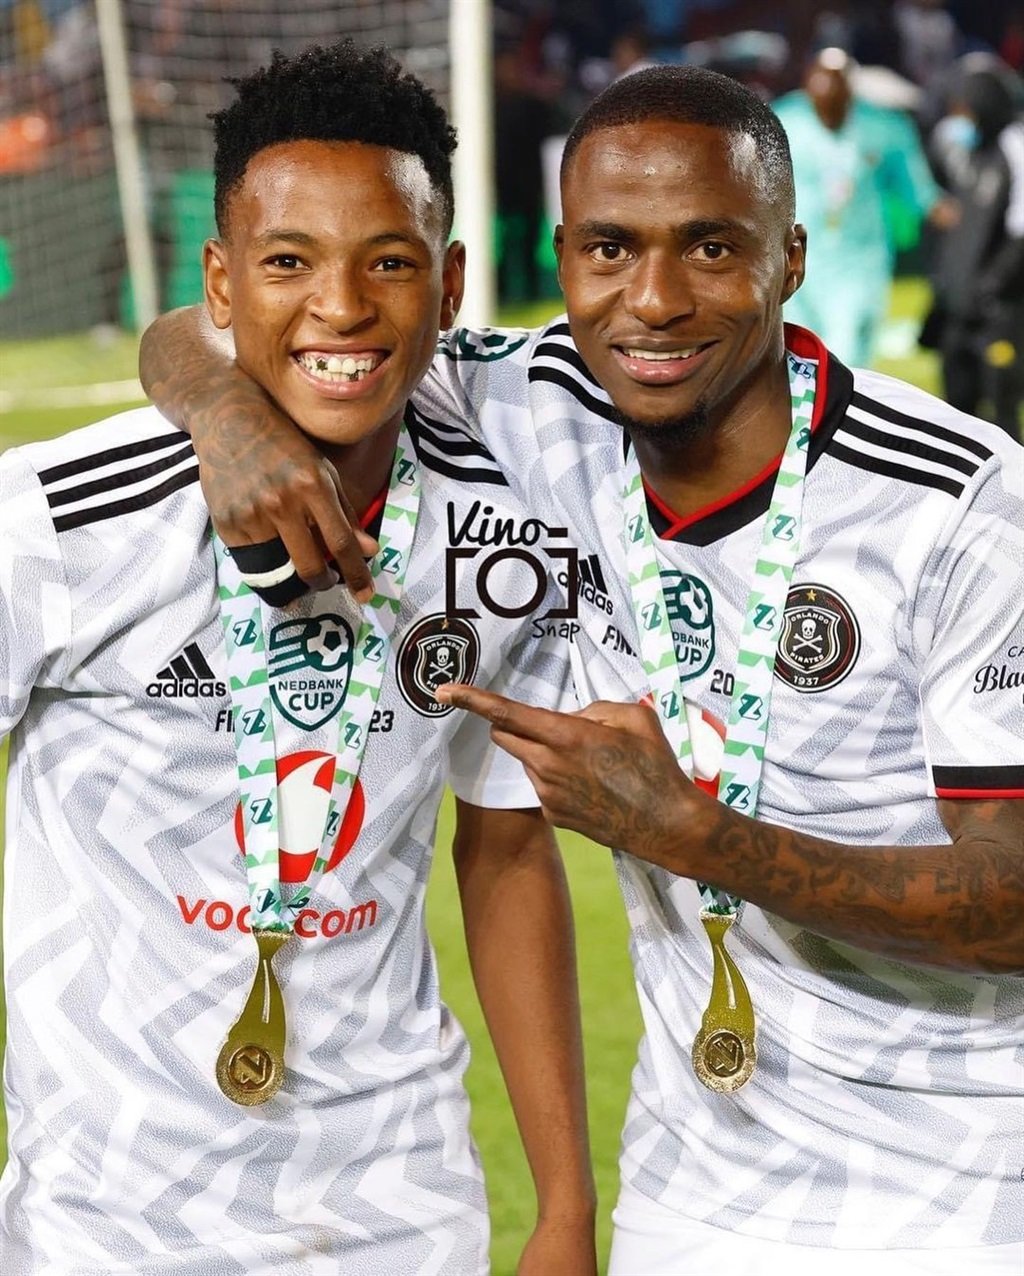 After an enthralling draw between Mamelodi Sundowns and Orlando Pirates, Relebohile Mofokeng's moment with Thembinkosi Lorch caught the attention of many fans.
